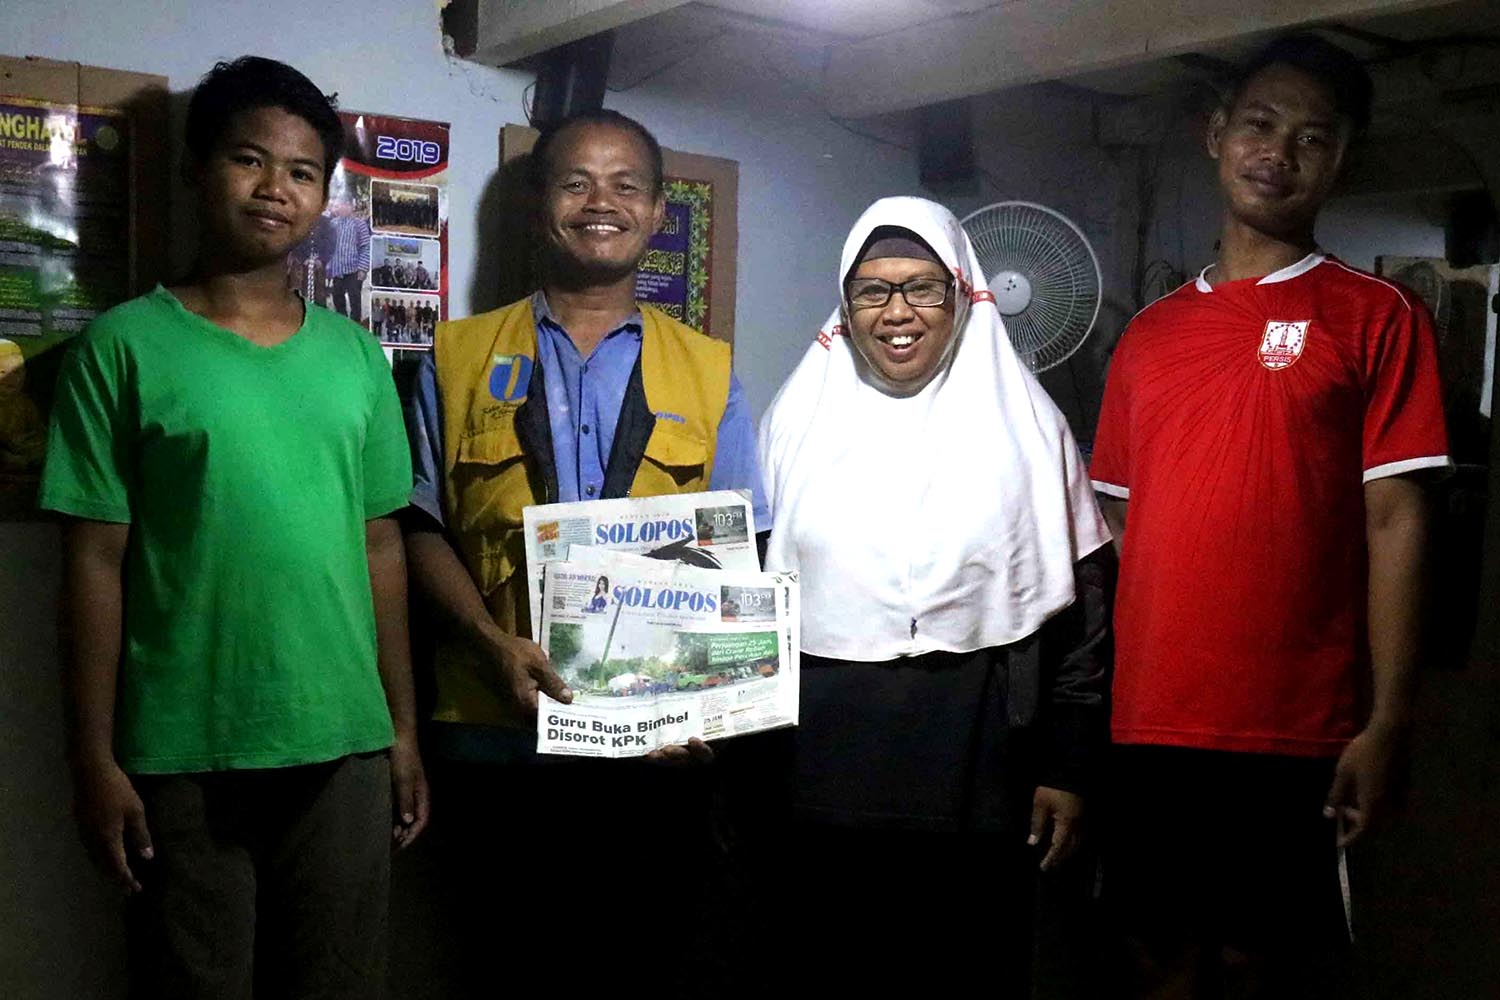 Newspaper deliveryman Sarip alongside his family. Sarip believes his job is a source of blessings for his family. JP/Maksum Nur Fauzan